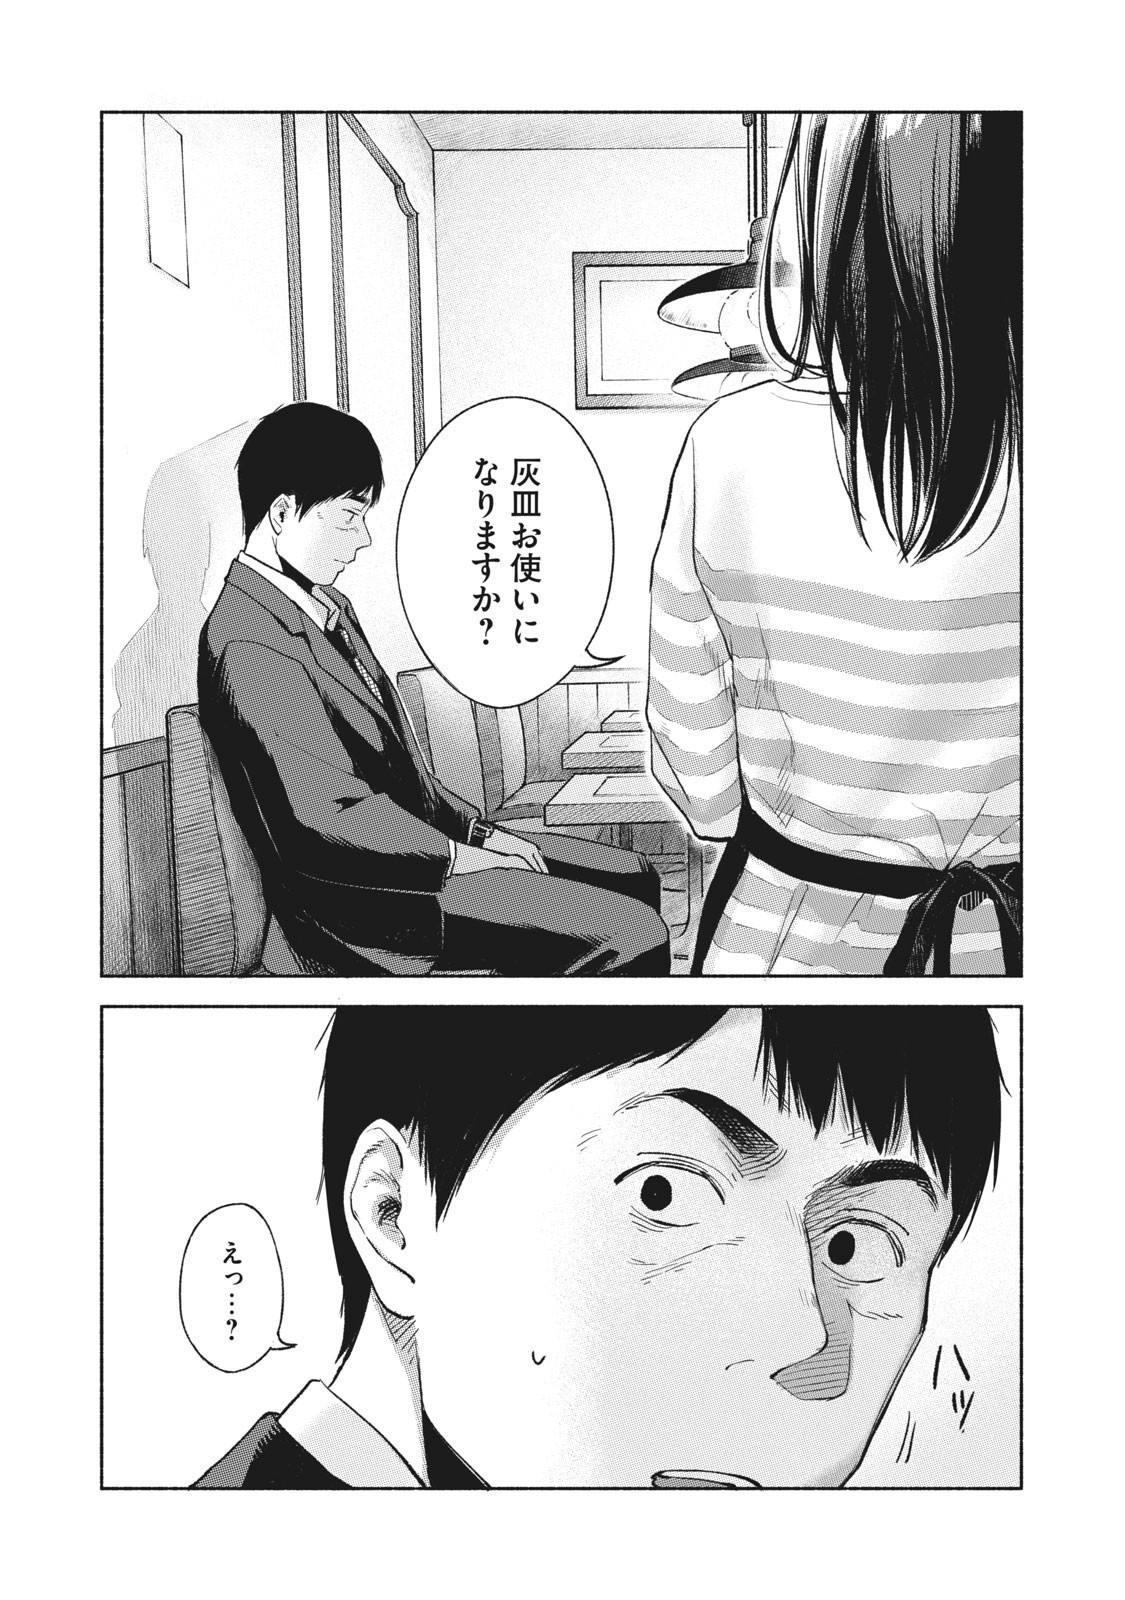 Musume no Tomodachi - Chapter 61.5 - Page 6